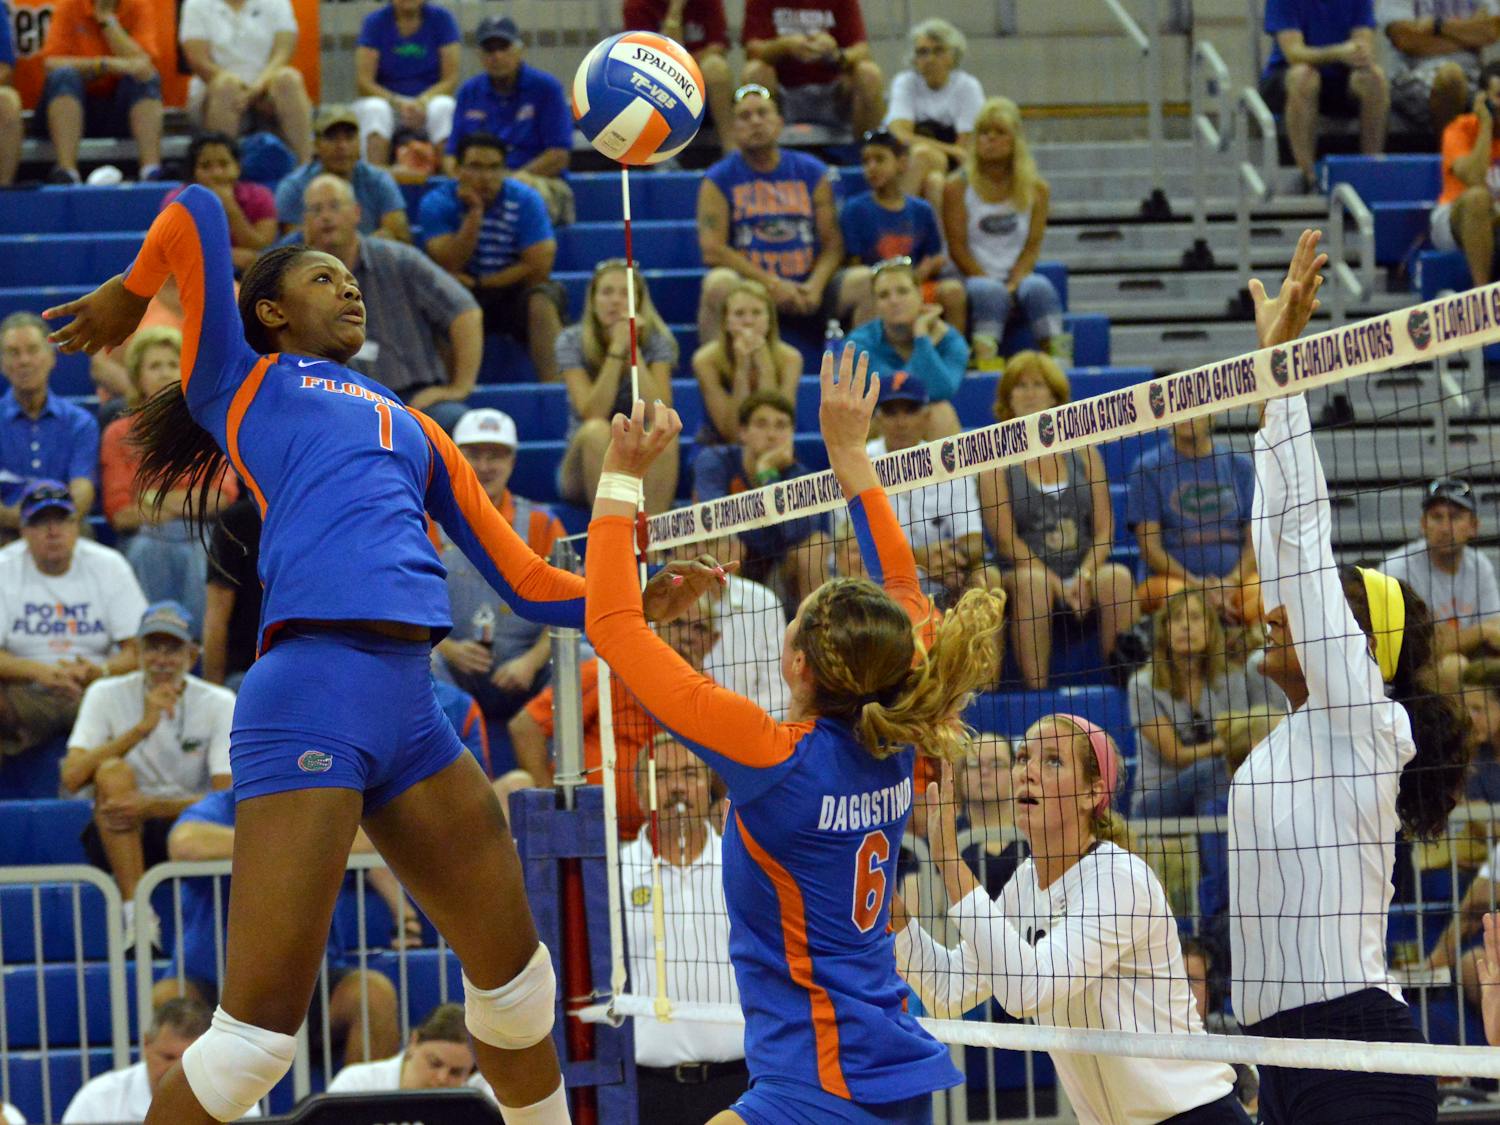 The No. 10 Gators volleyball team swept Georgia Southern (25-19, 25-11, 25-15) and Idaho (26-24, 25-15, 25-13) on Friday in the O'Connell Center.